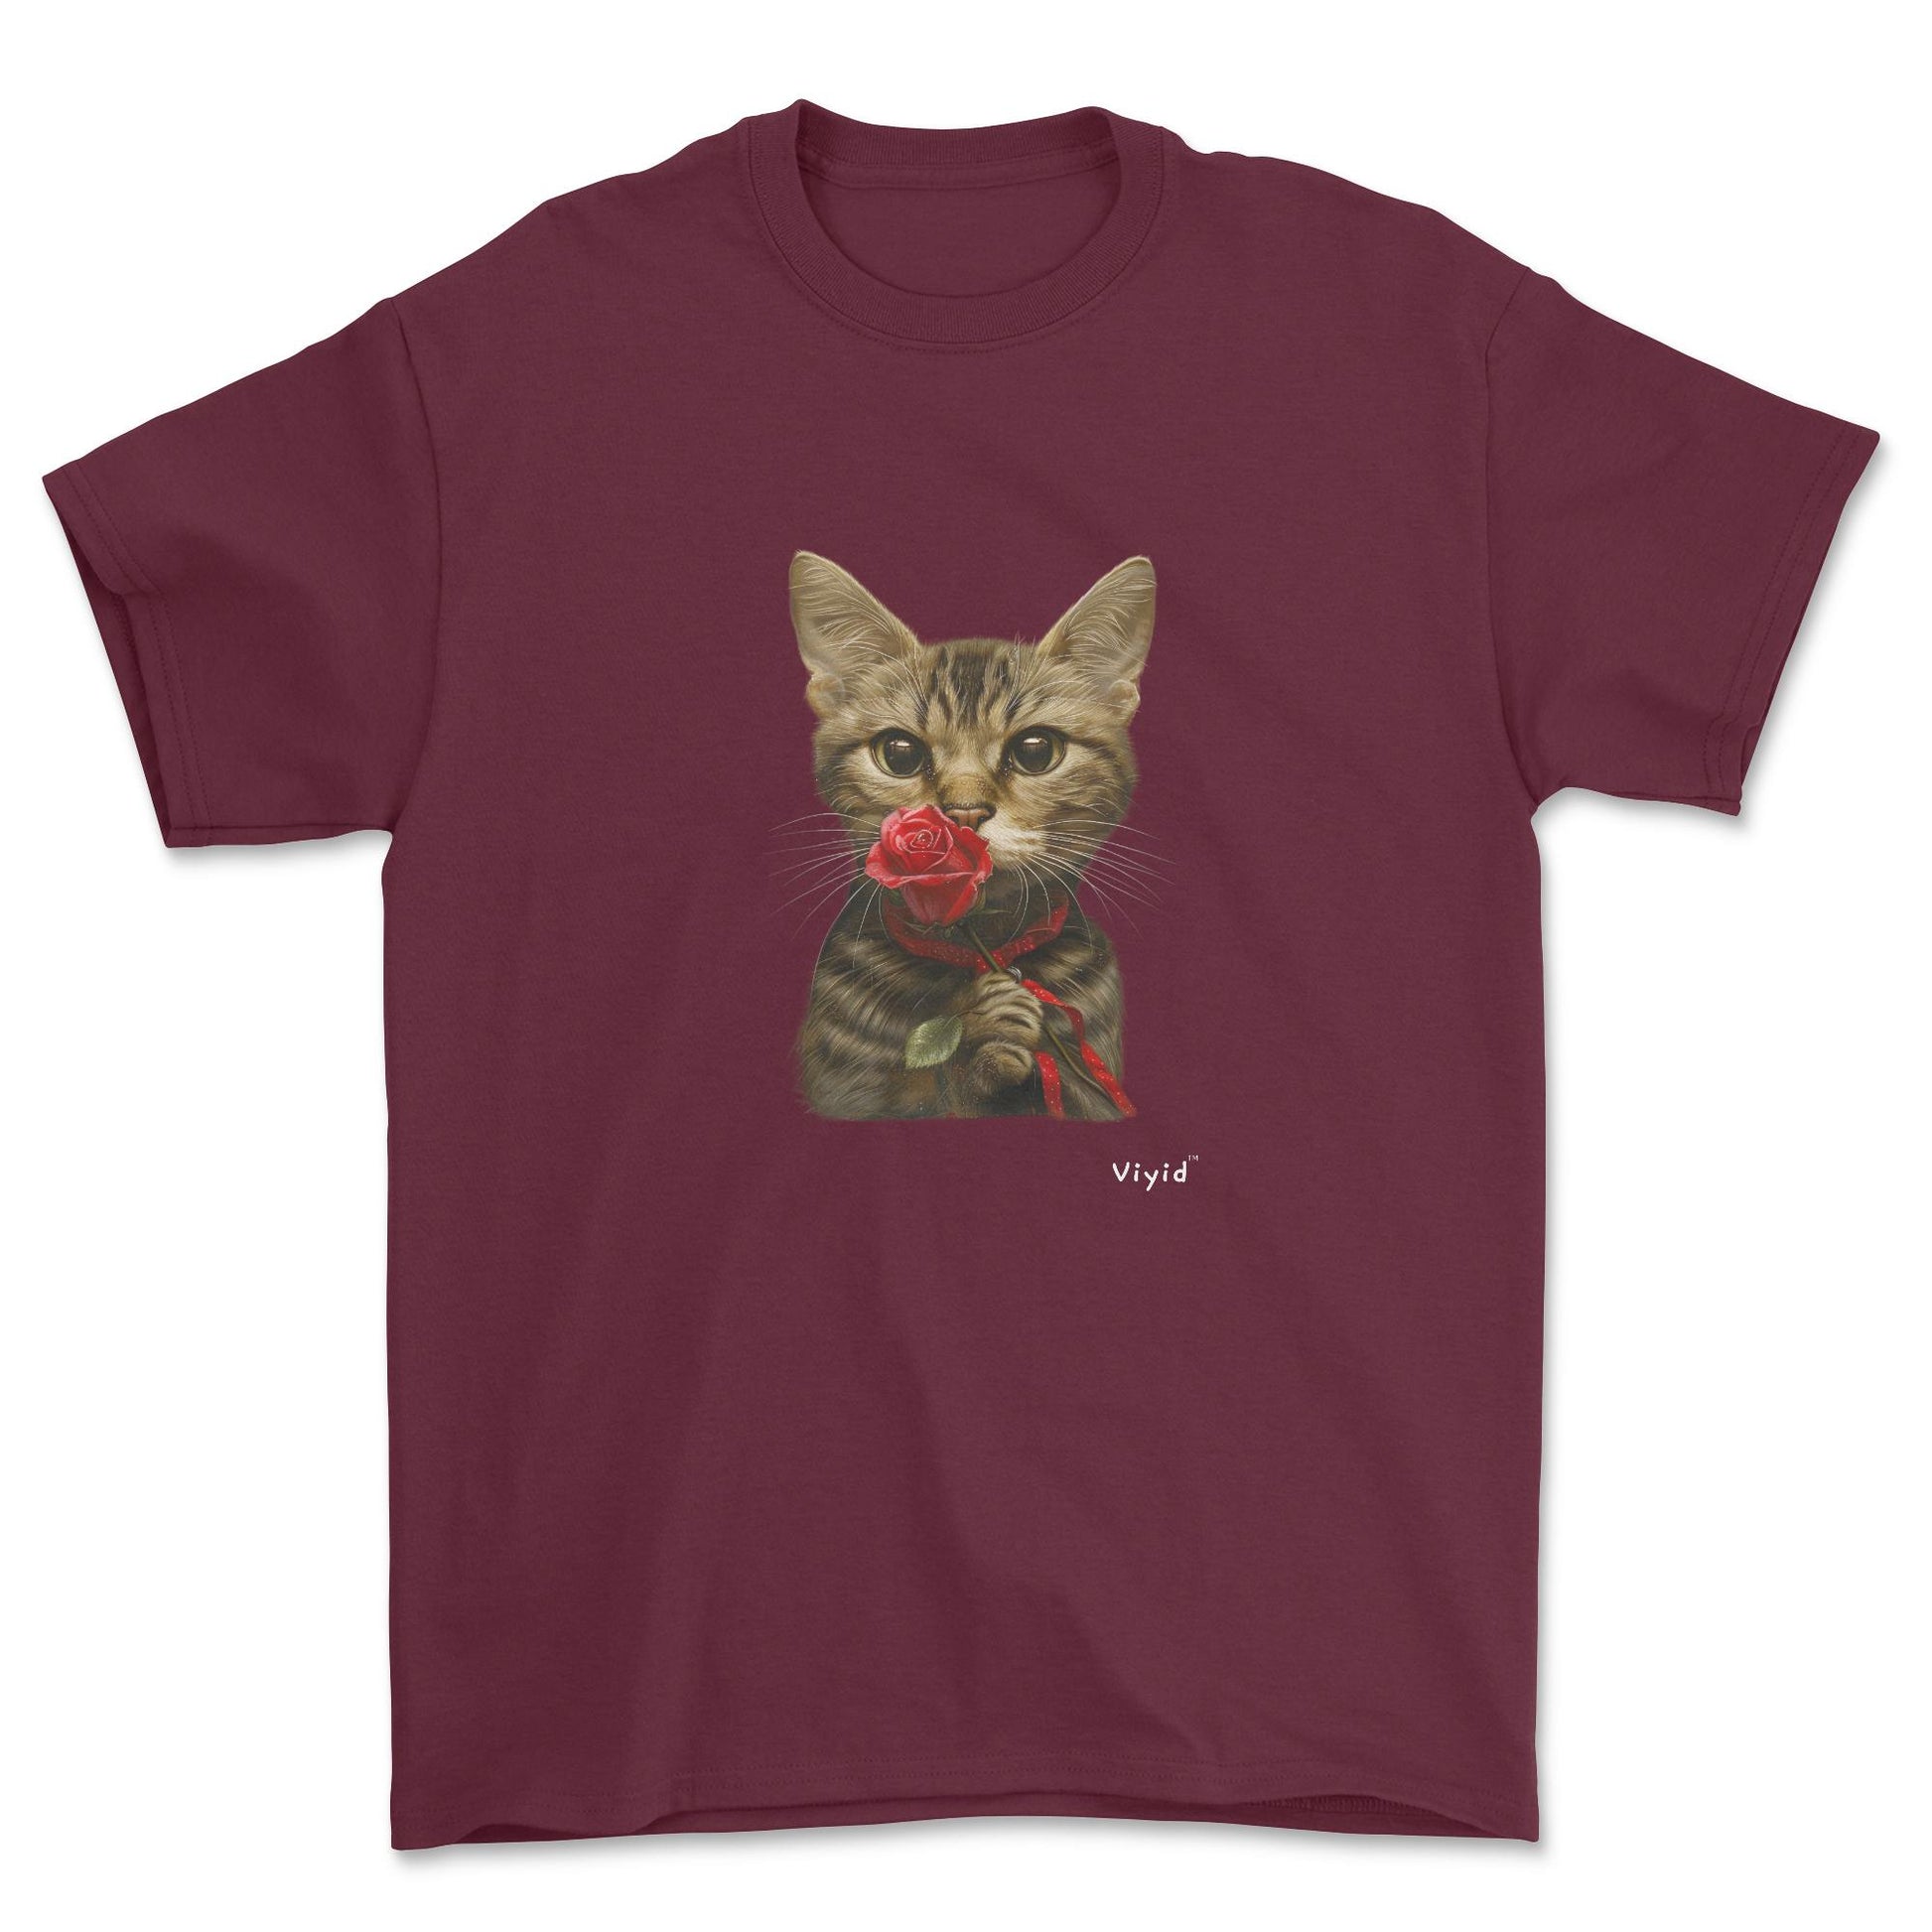 sniffing rose domestic shorthair cat youth t-shirt maroon